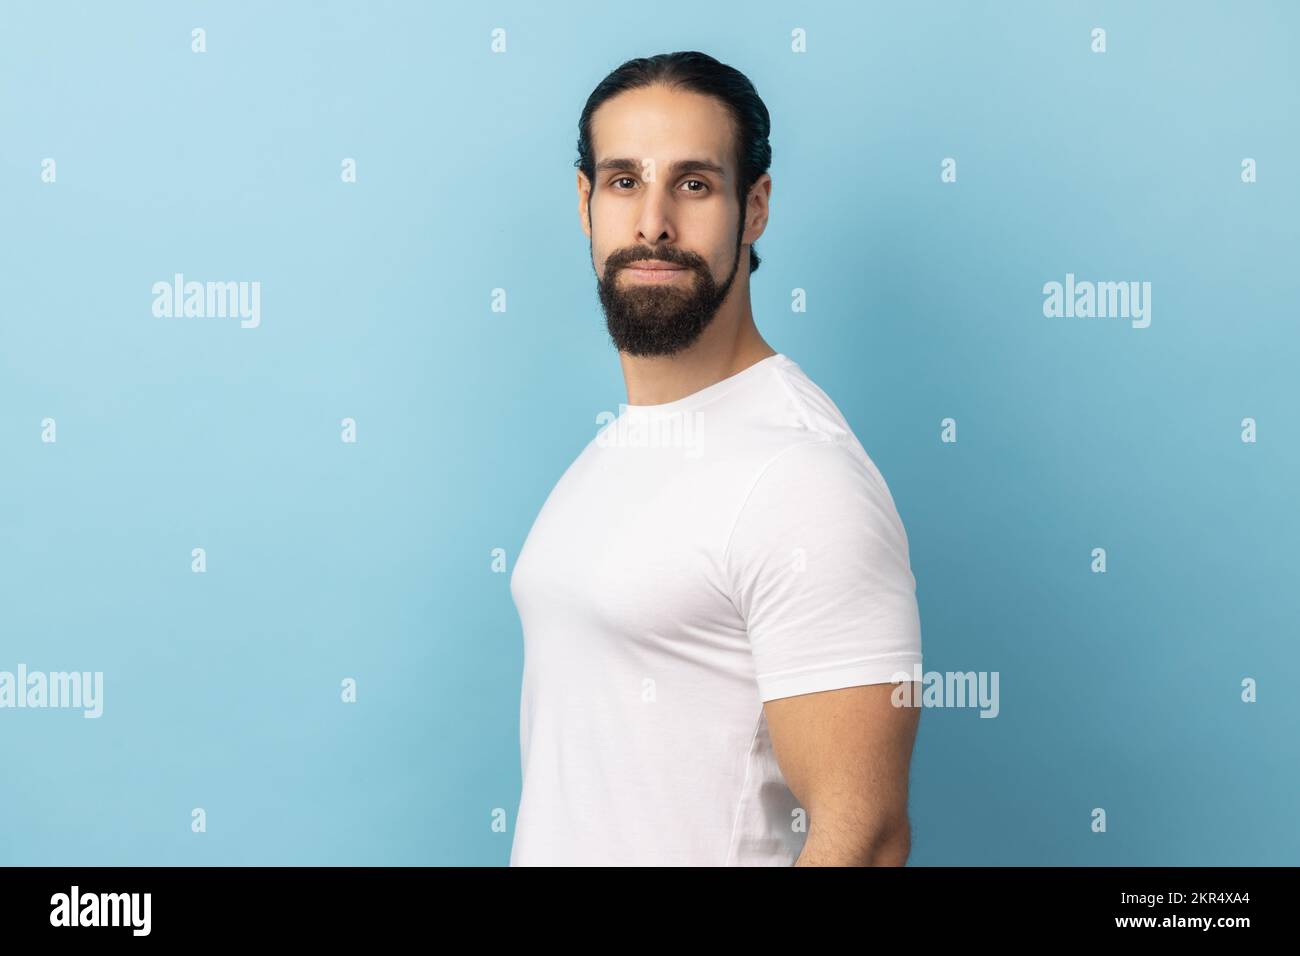 Side view portrait of bearded handsome man wearing white T-shirt standing looking at camera with serious face, being strict and bossy. Indoor studio shot isolated on blue background. Stock Photo